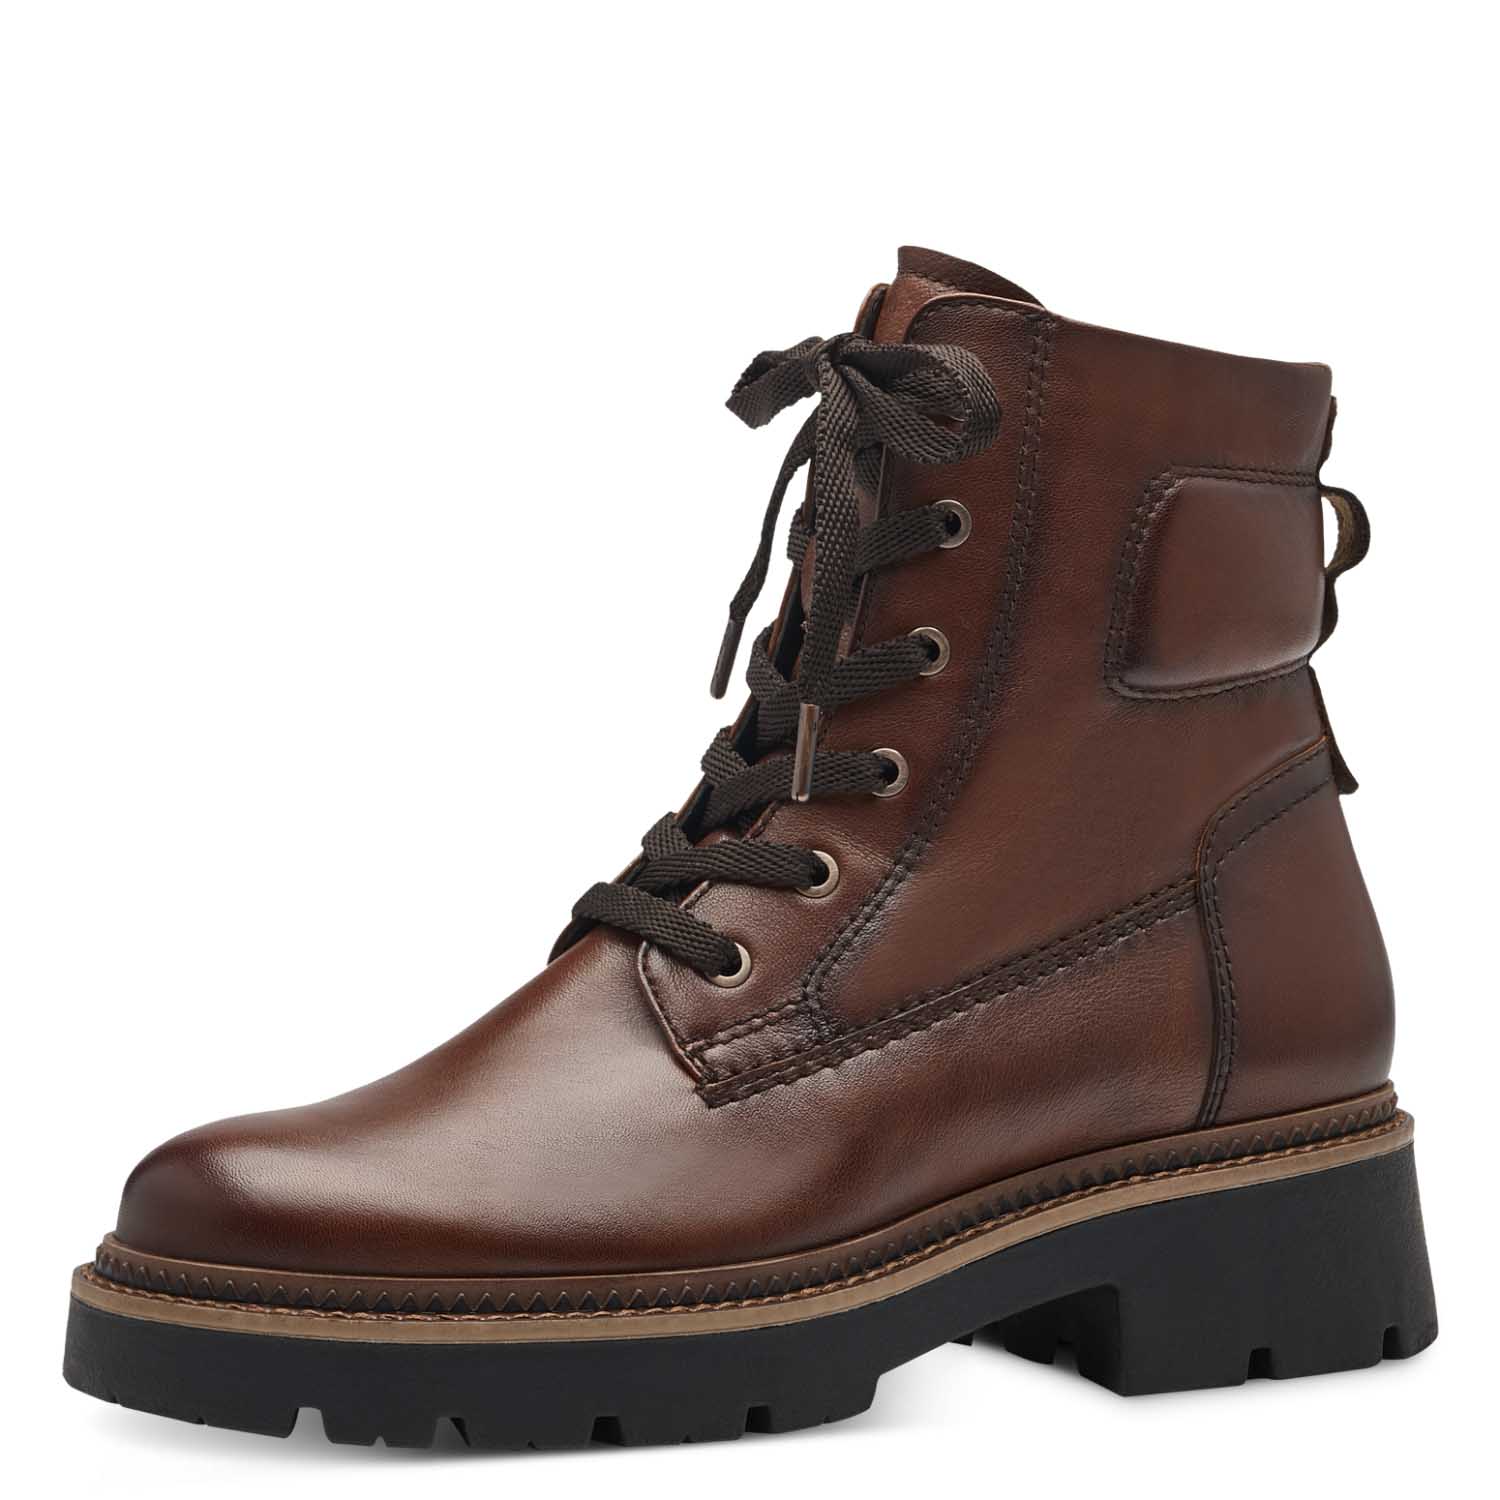 Angled shot of Tamaris leather brown lace up boot.